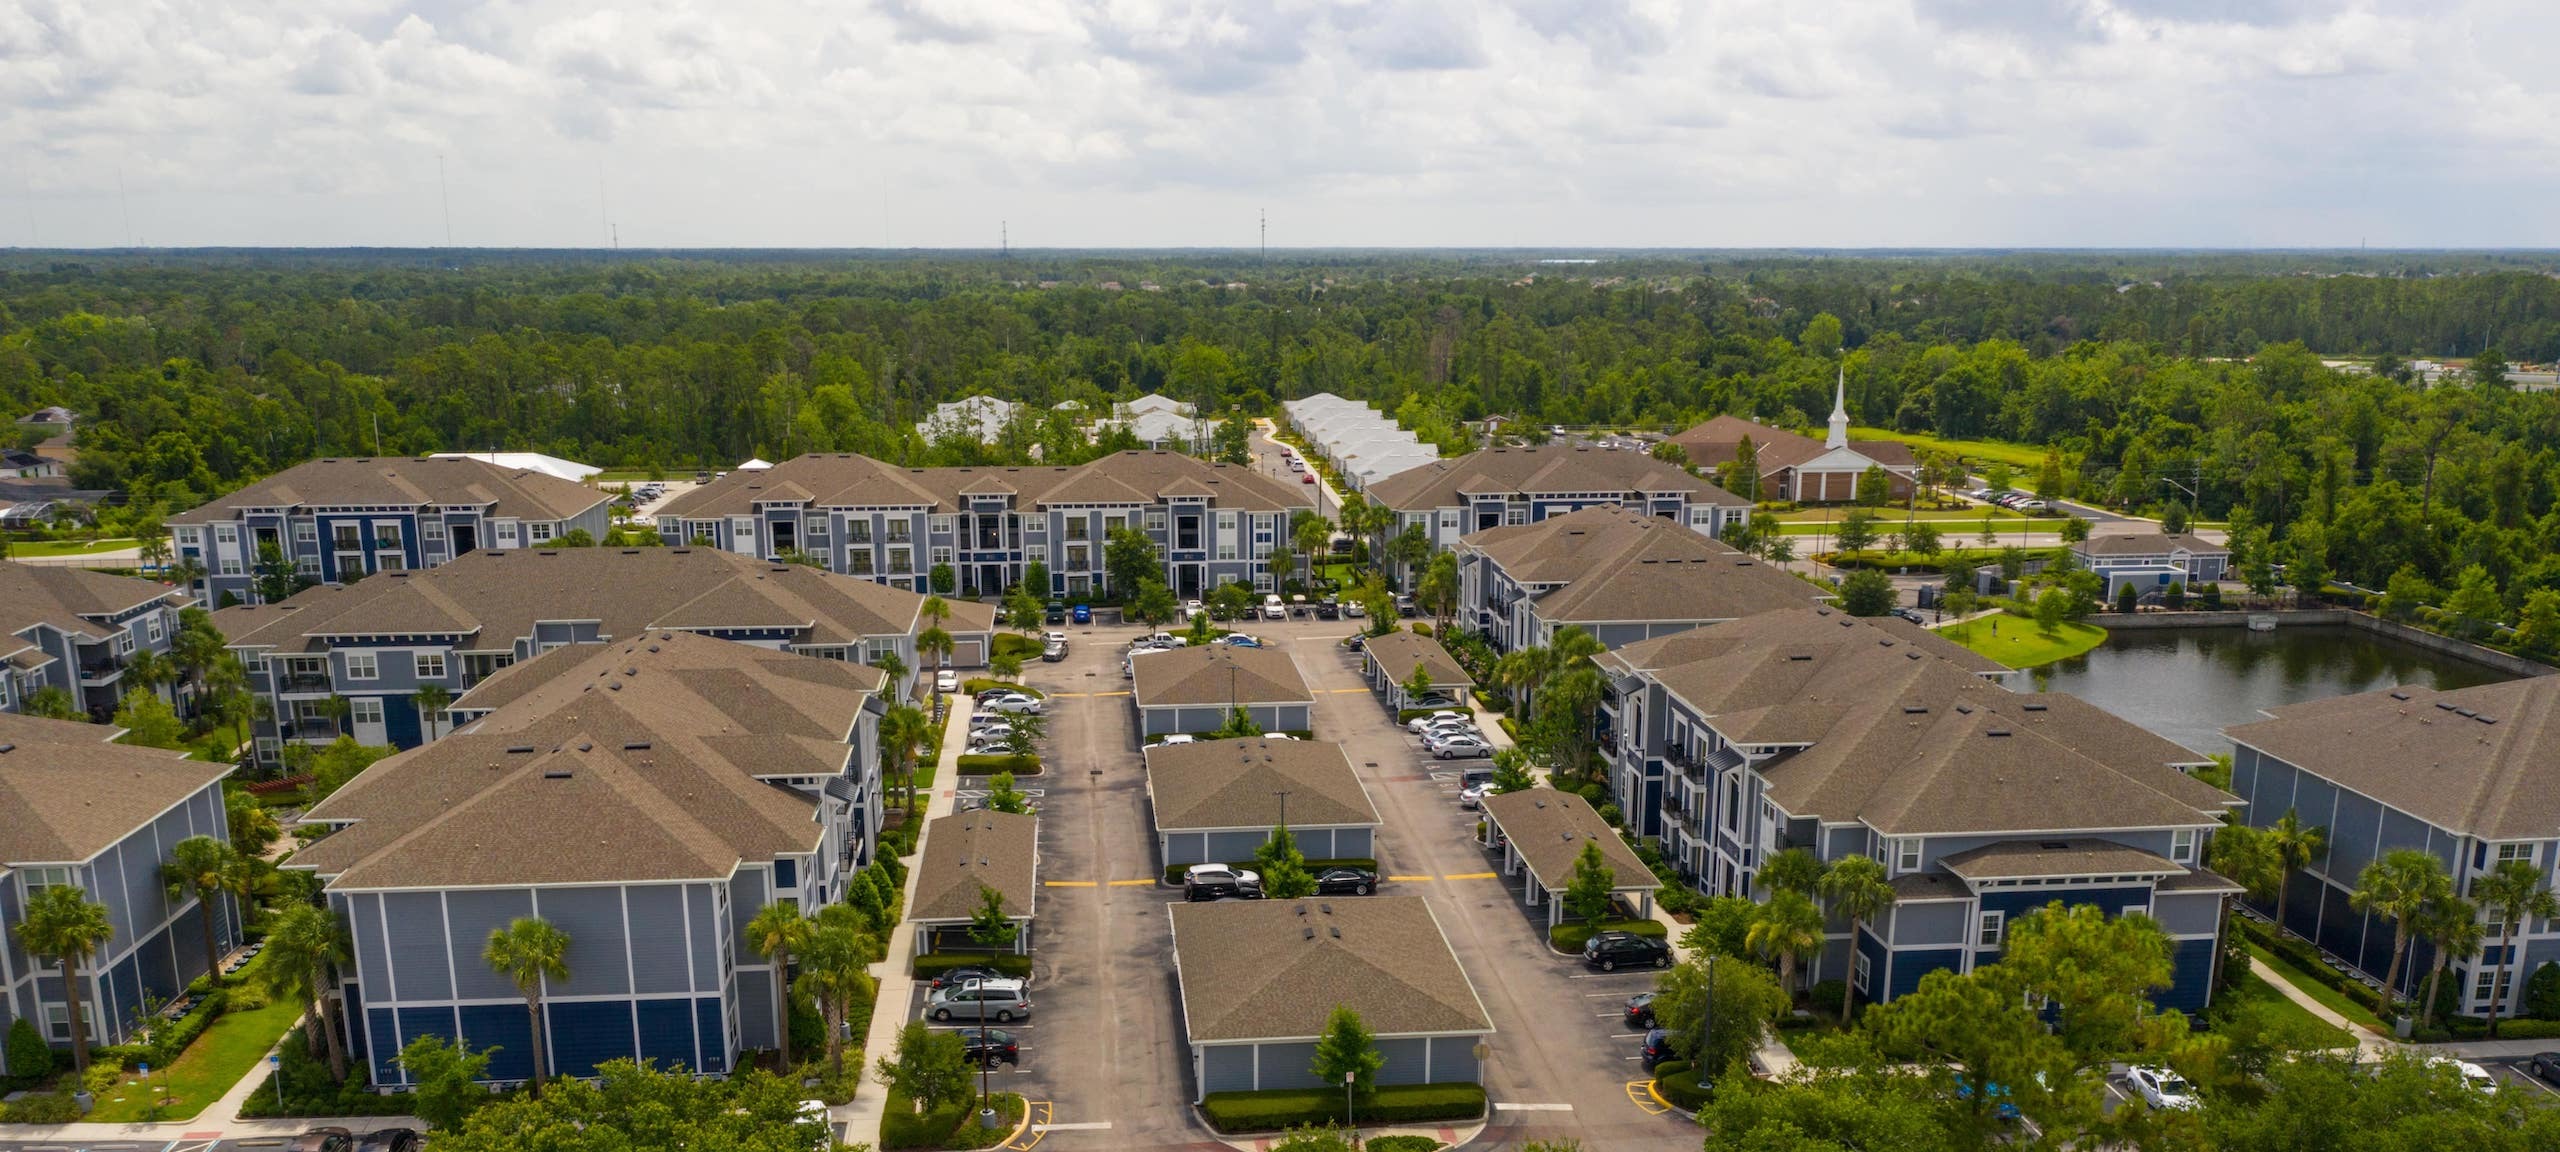 Areal view of a residential neighborhood in Orlando, FL